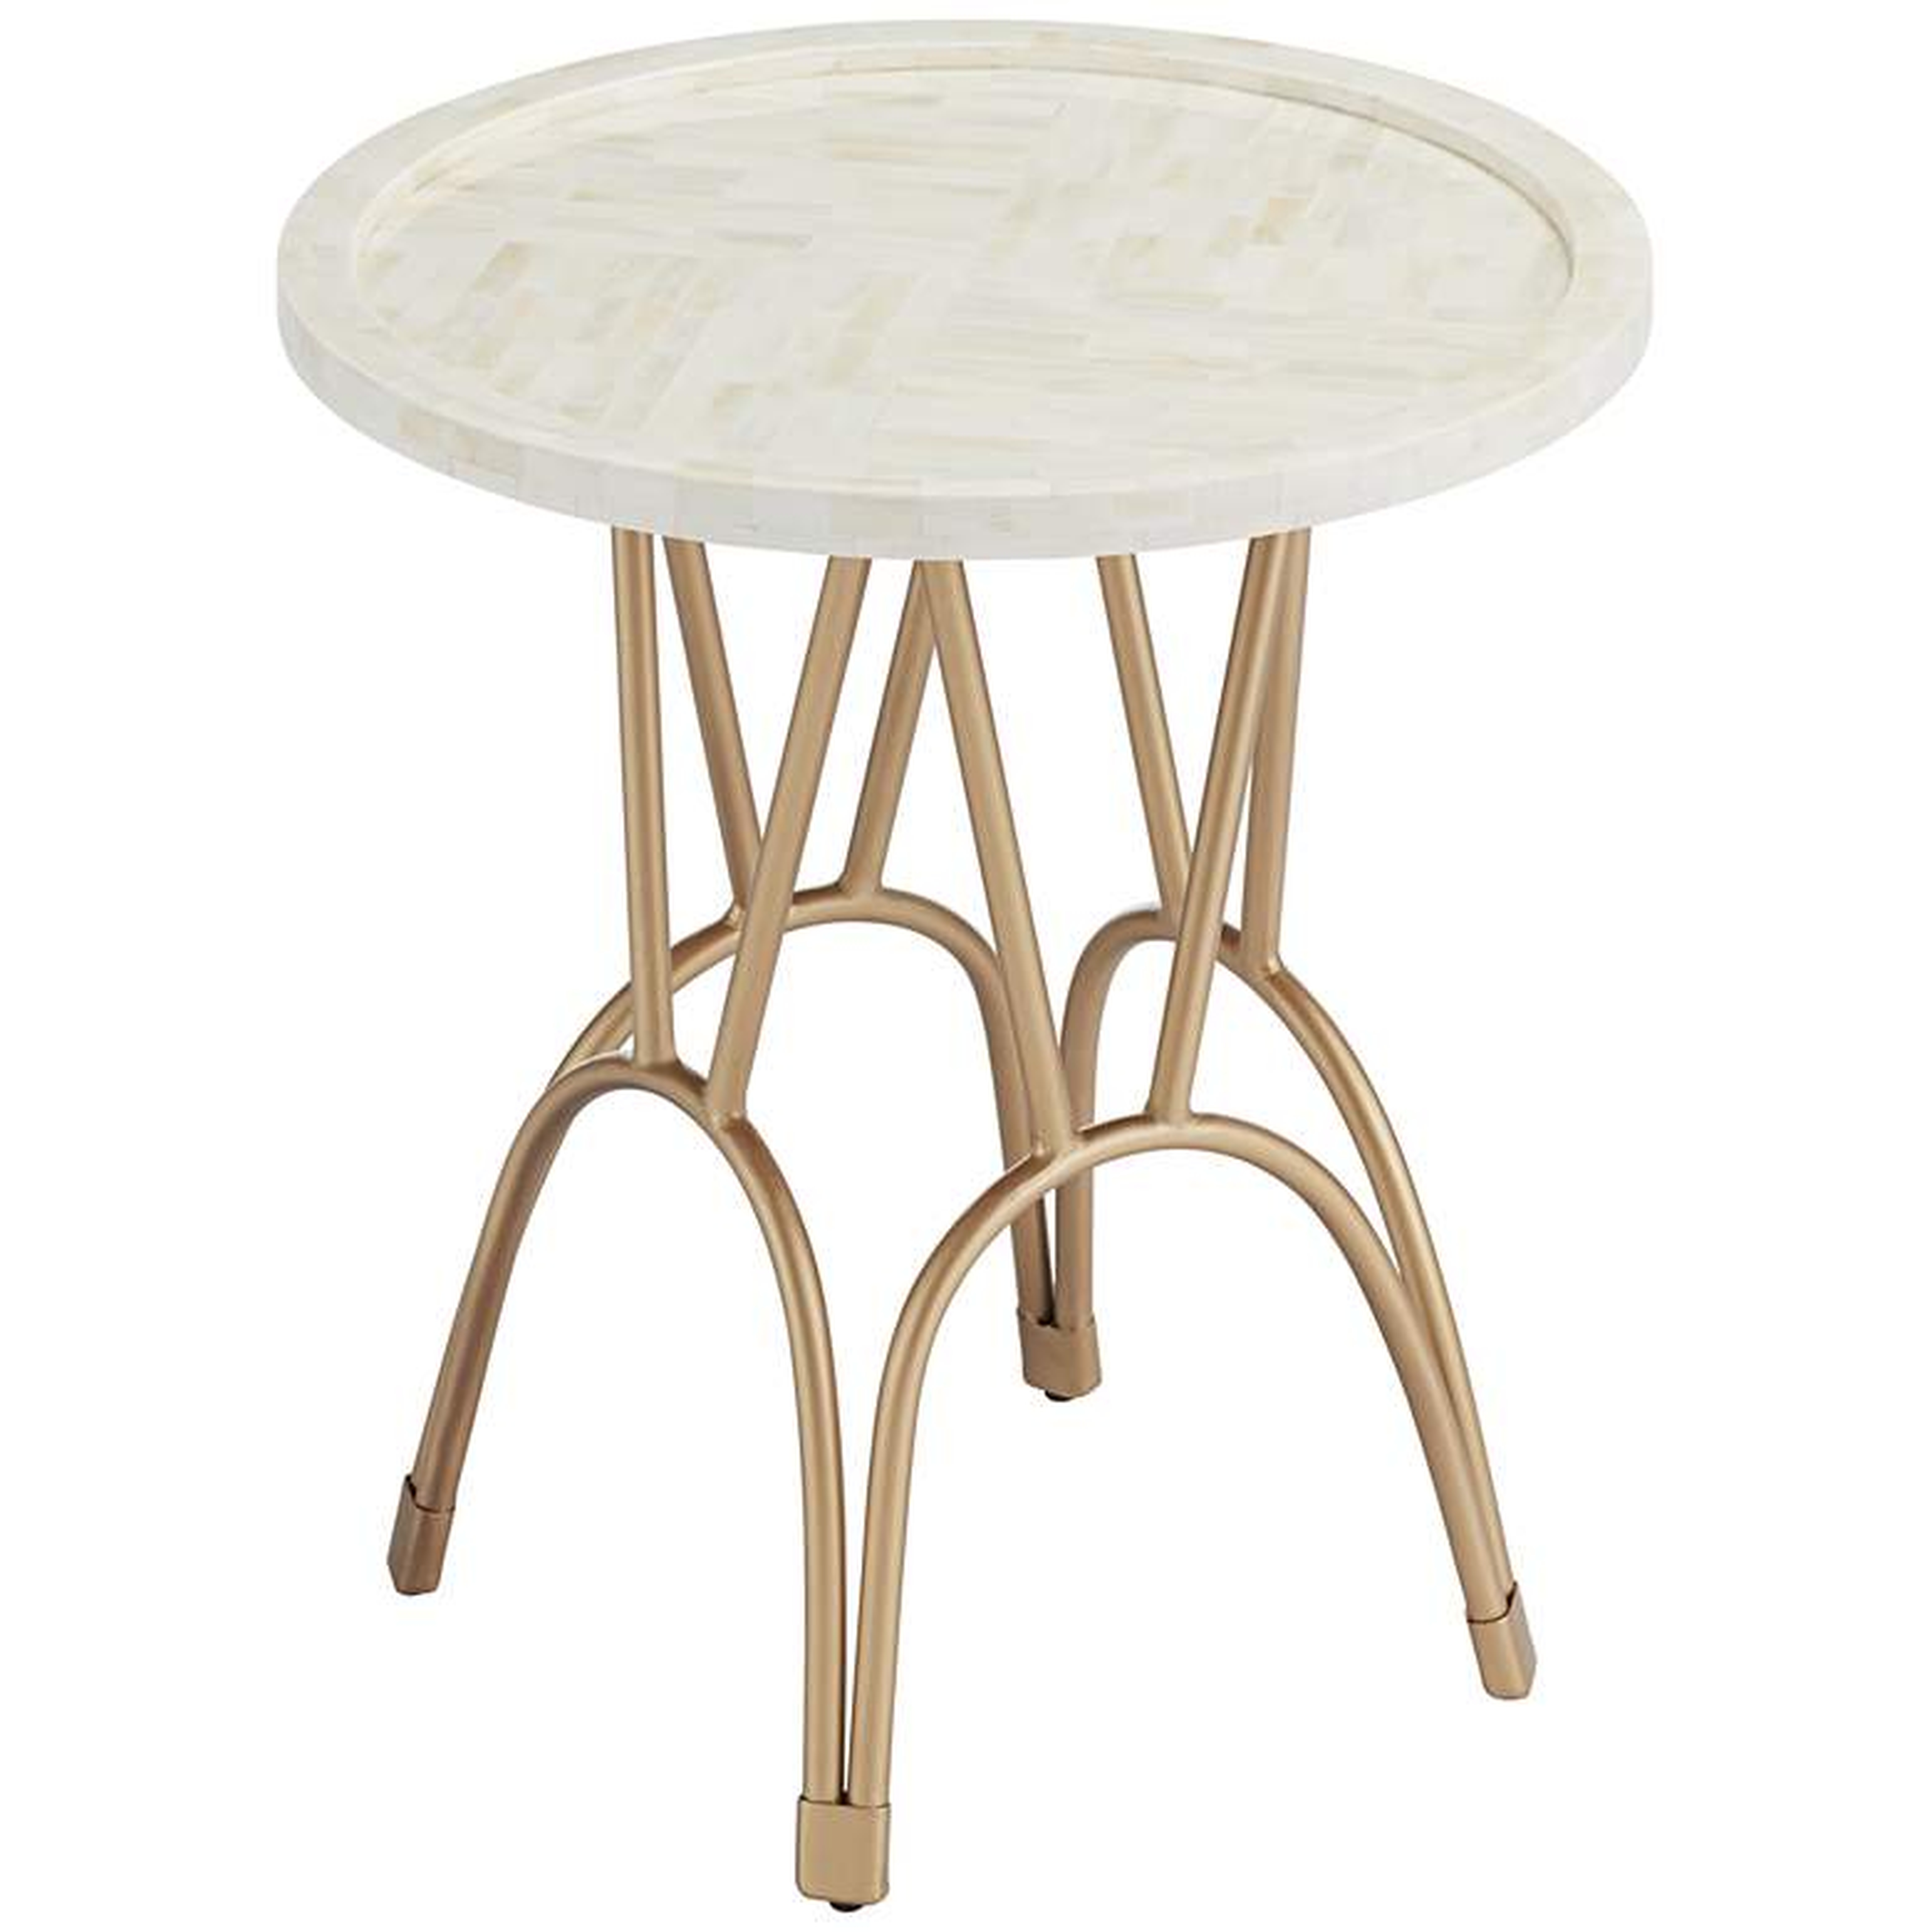 Osso Gold Mosaic Bone Accent Table - Style # 76X46 - Lamps Plus